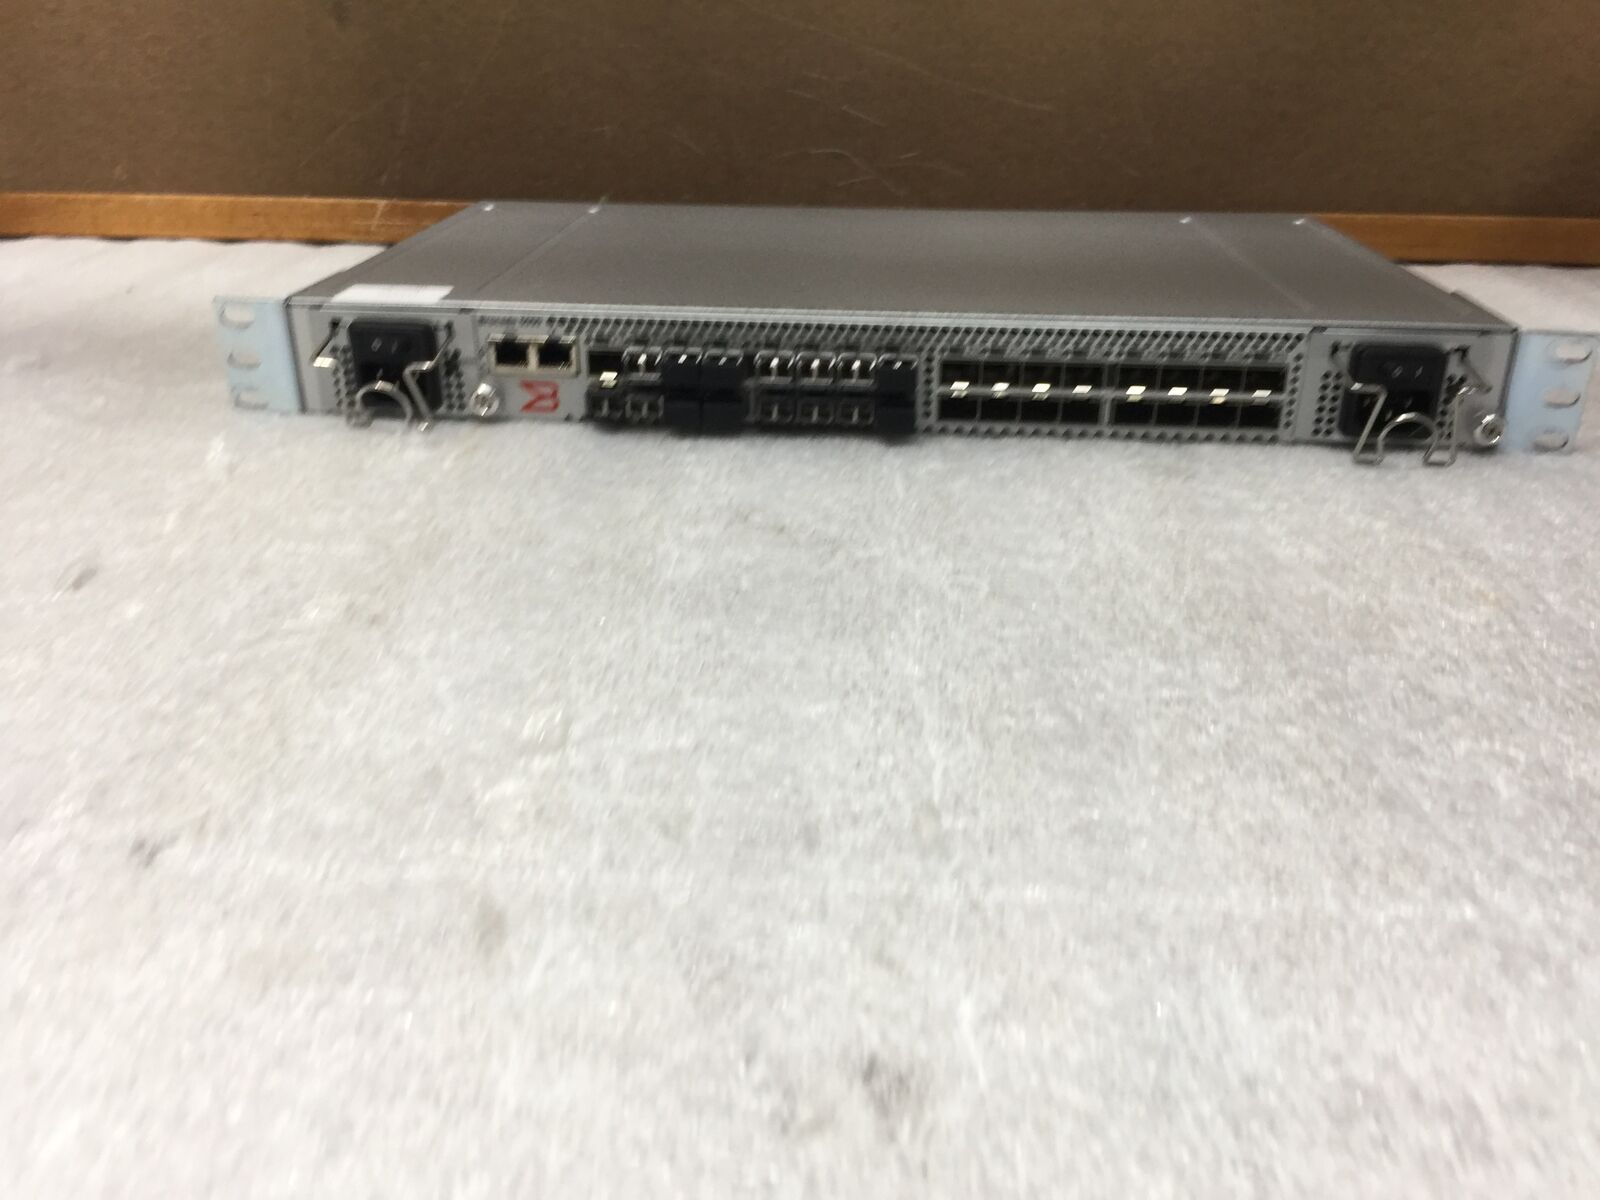 EMC Brocade 5000 DS-5000B Fibre Channel Switch With 24 Transceivers, Tested